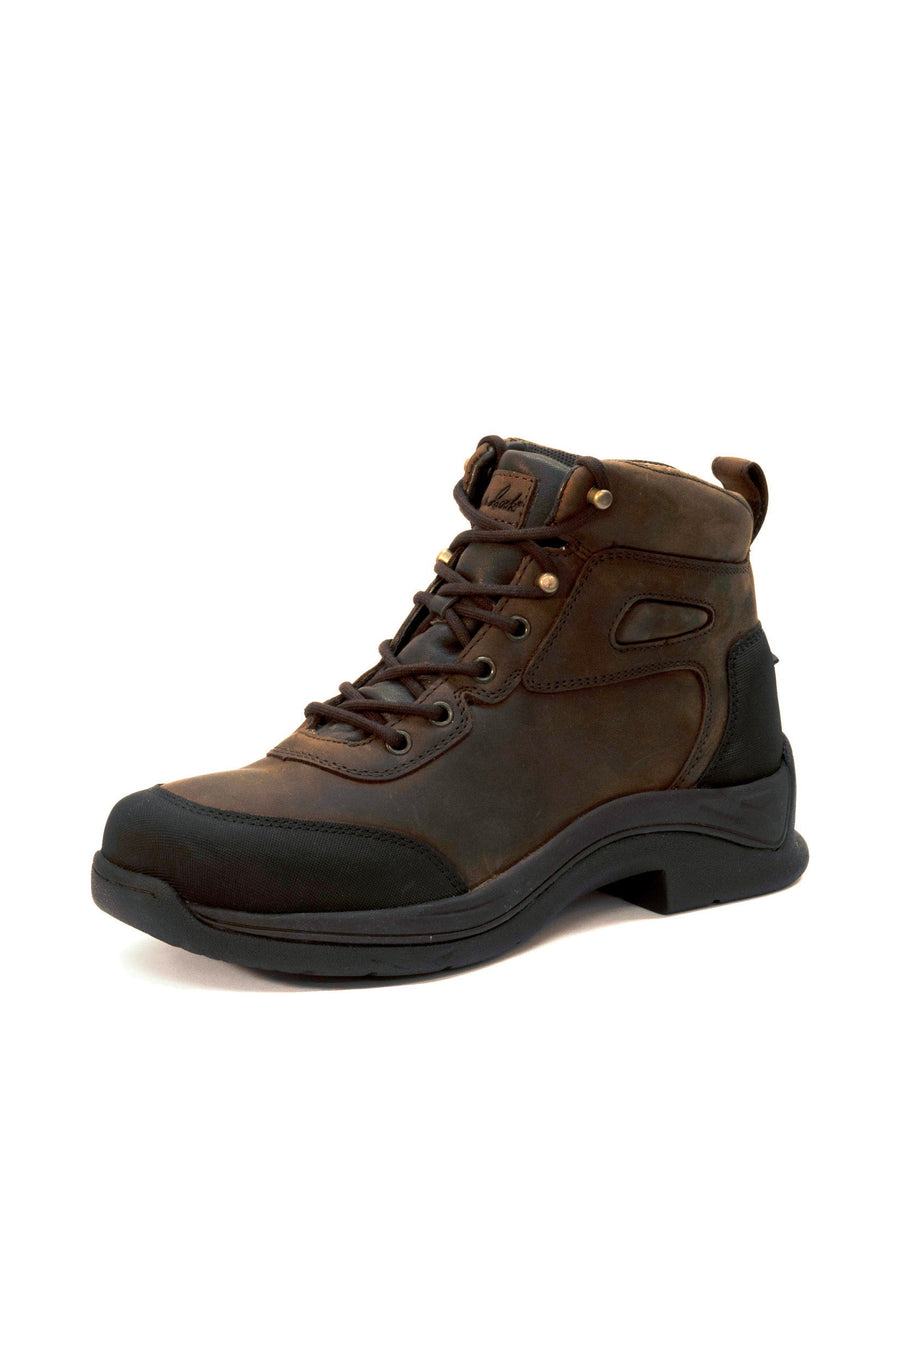 Thomas Cook Mens Boots & Shoes MEN 7 / Dark Brown Thomas Cook Boots Mens Arkaba Lace Up (TCP18214)